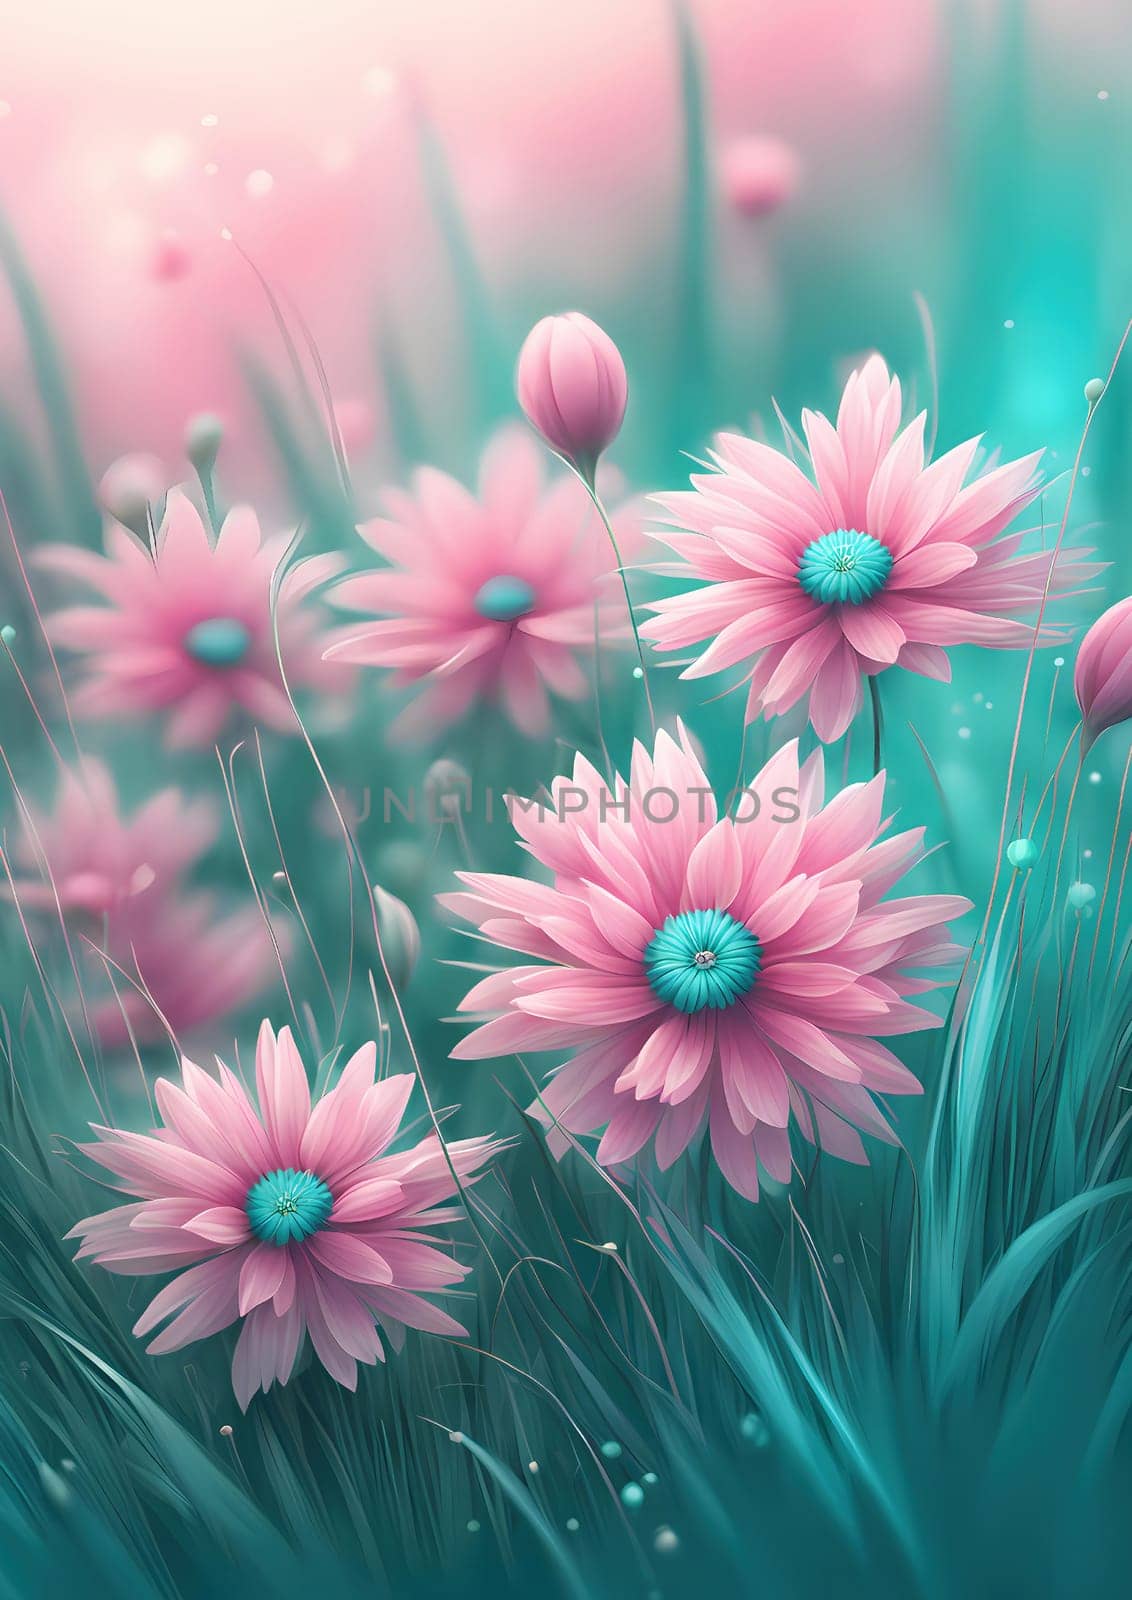 there are many pink flowers growing in the grass, beautiful exquisite art, teal, softly lit, depth of focus, radiating connection inside, soft pale tone, cute illustration, smoothly shaded by rostik924